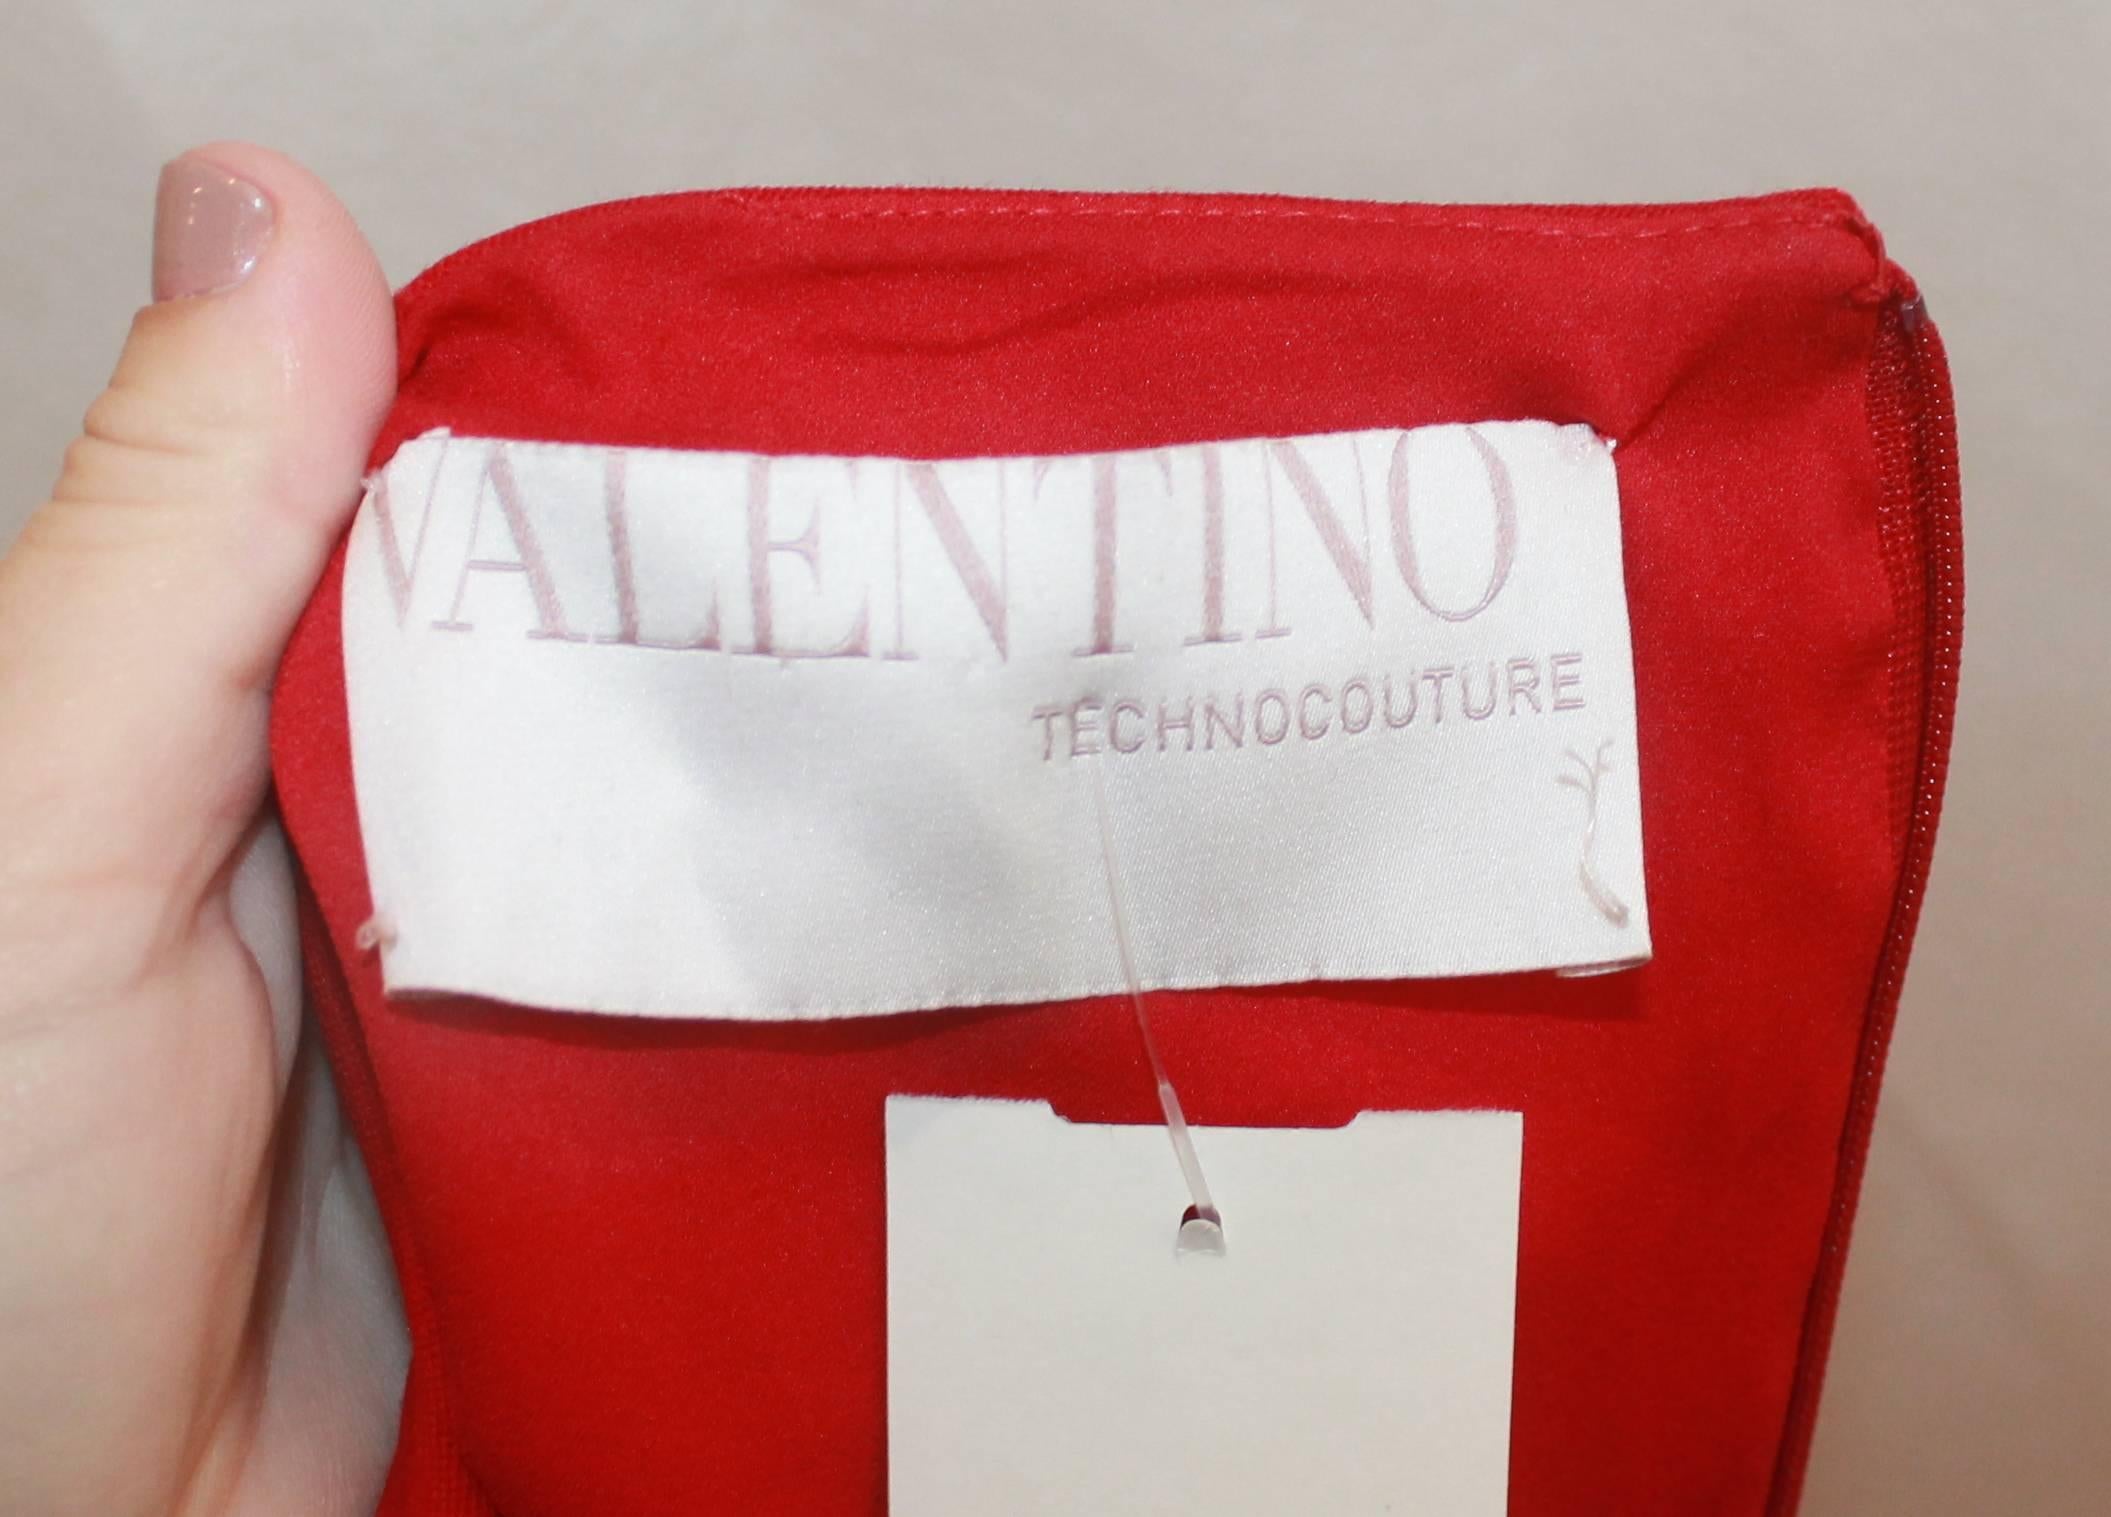 Valentino Techno Couture Red Sleeveless Dress with Bow - 4  1